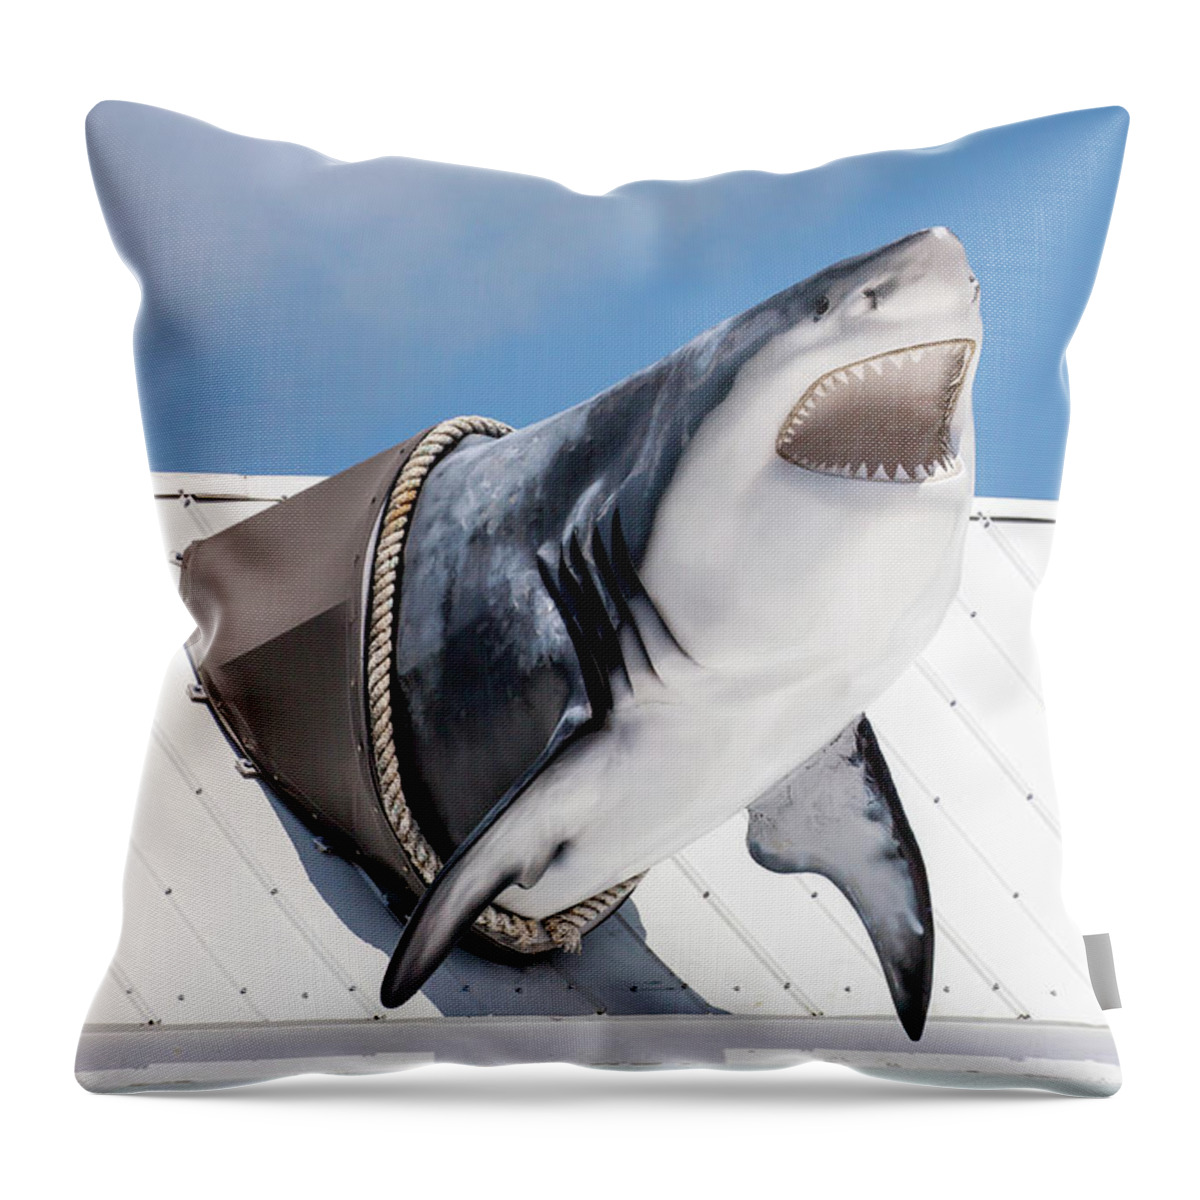 Key Largo Throw Pillow featuring the photograph Shark Attack by Art Block Collections